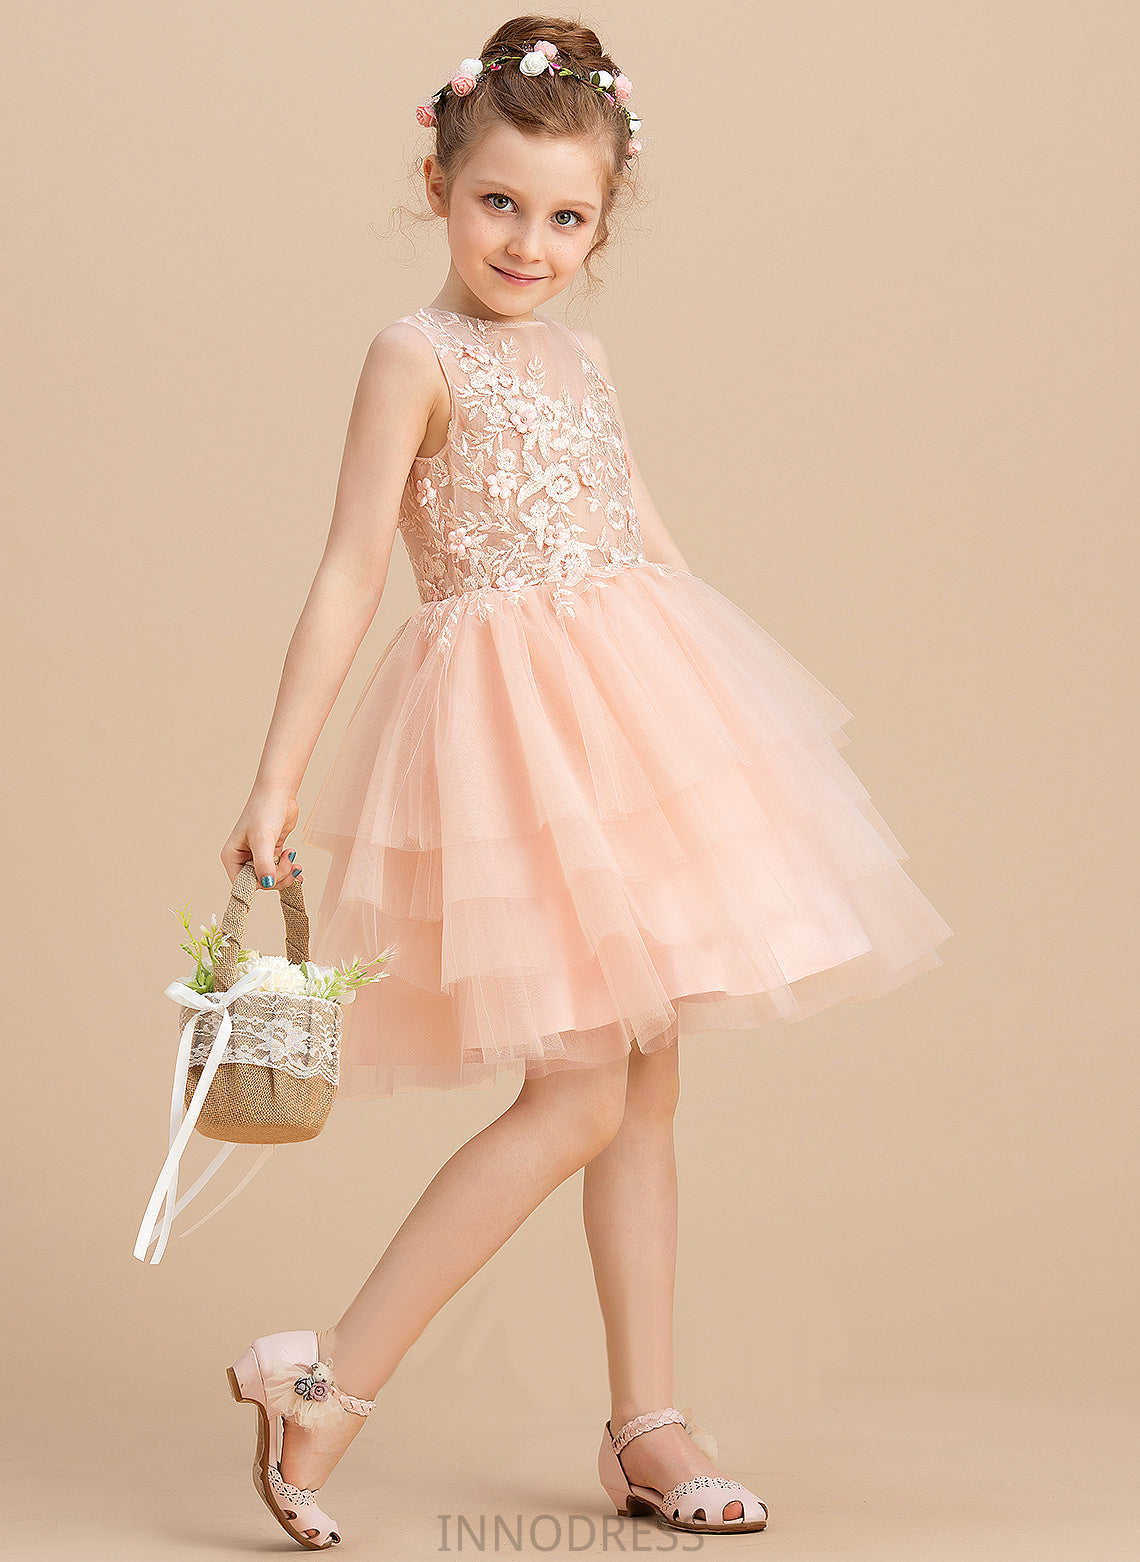 - Knee-length Scoop Neck Aniya Tulle/Lace Lace/Beading Sleeveless Flower Flower Girl Dresses Dress With Ball-Gown/Princess Girl